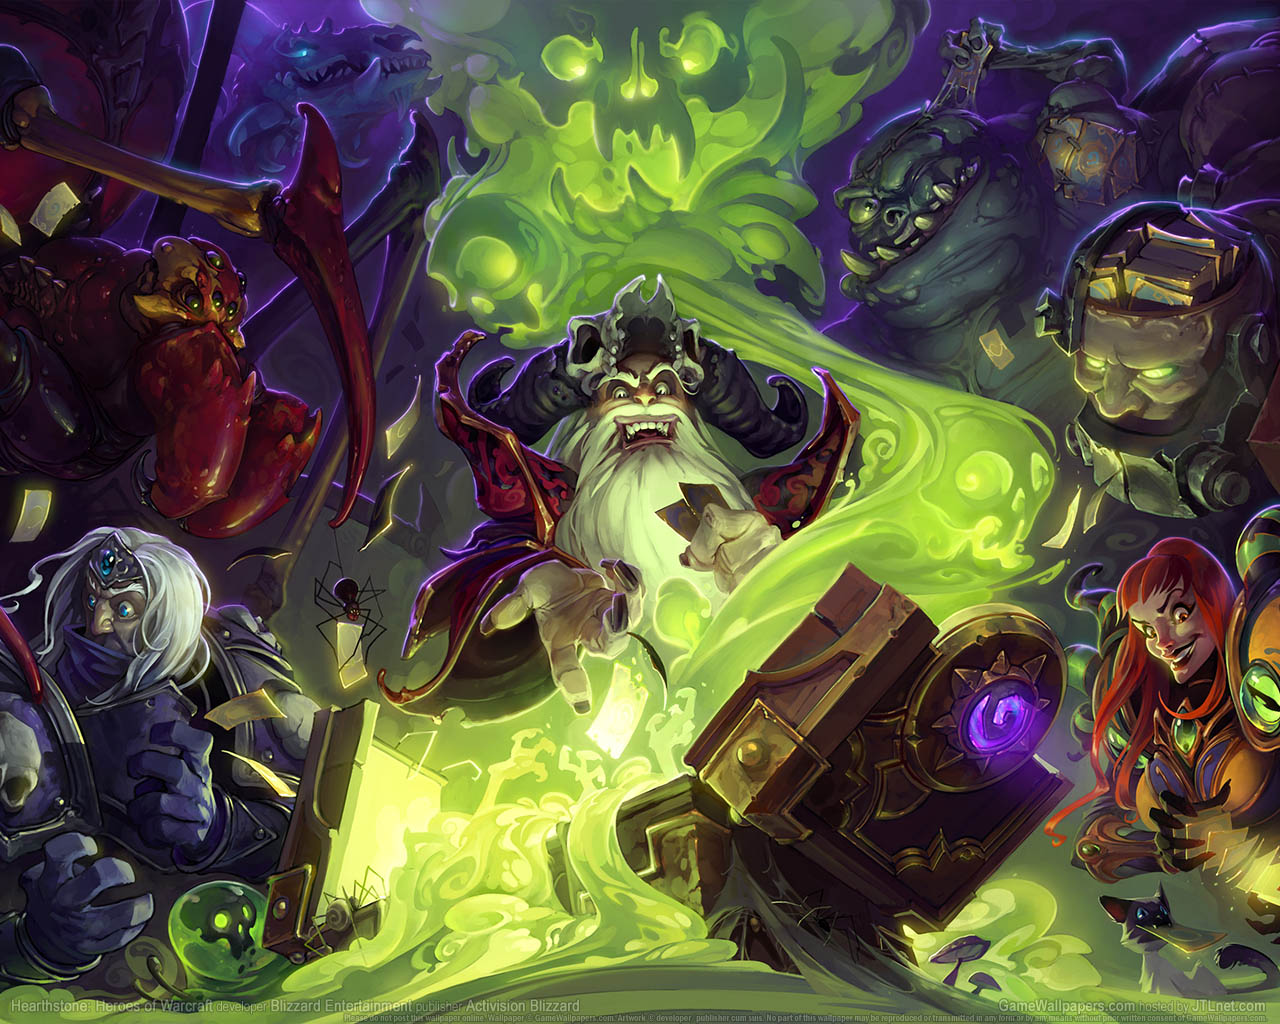 Hearthstone%25253A Heroes of Warcraft wallpaper 08 1280x1024